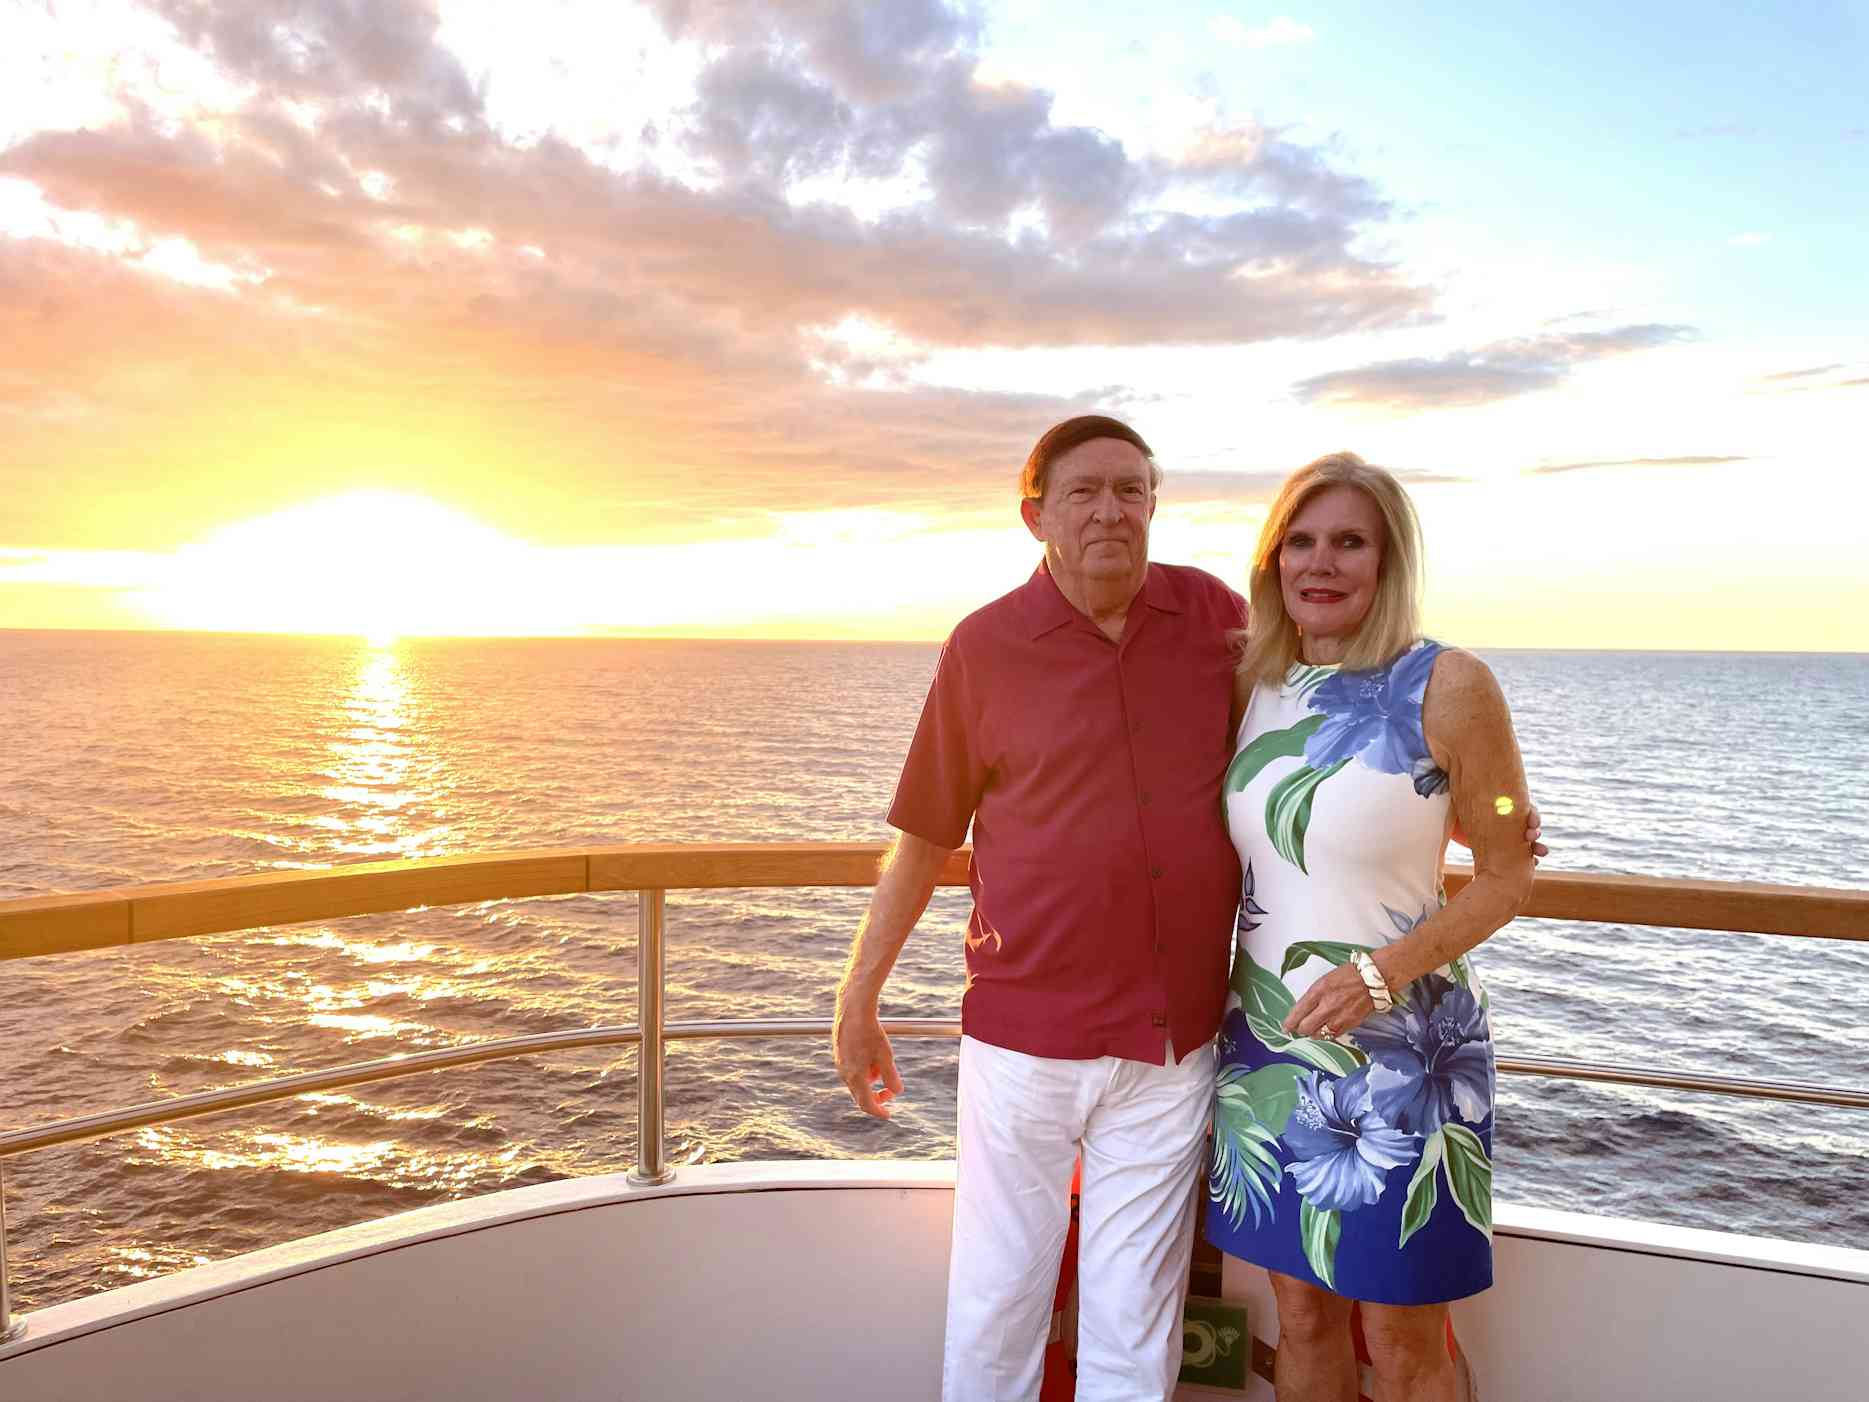 Ritz-Carlton Yacht Review: “Money Can Buy Happiness” Aboard Evrima